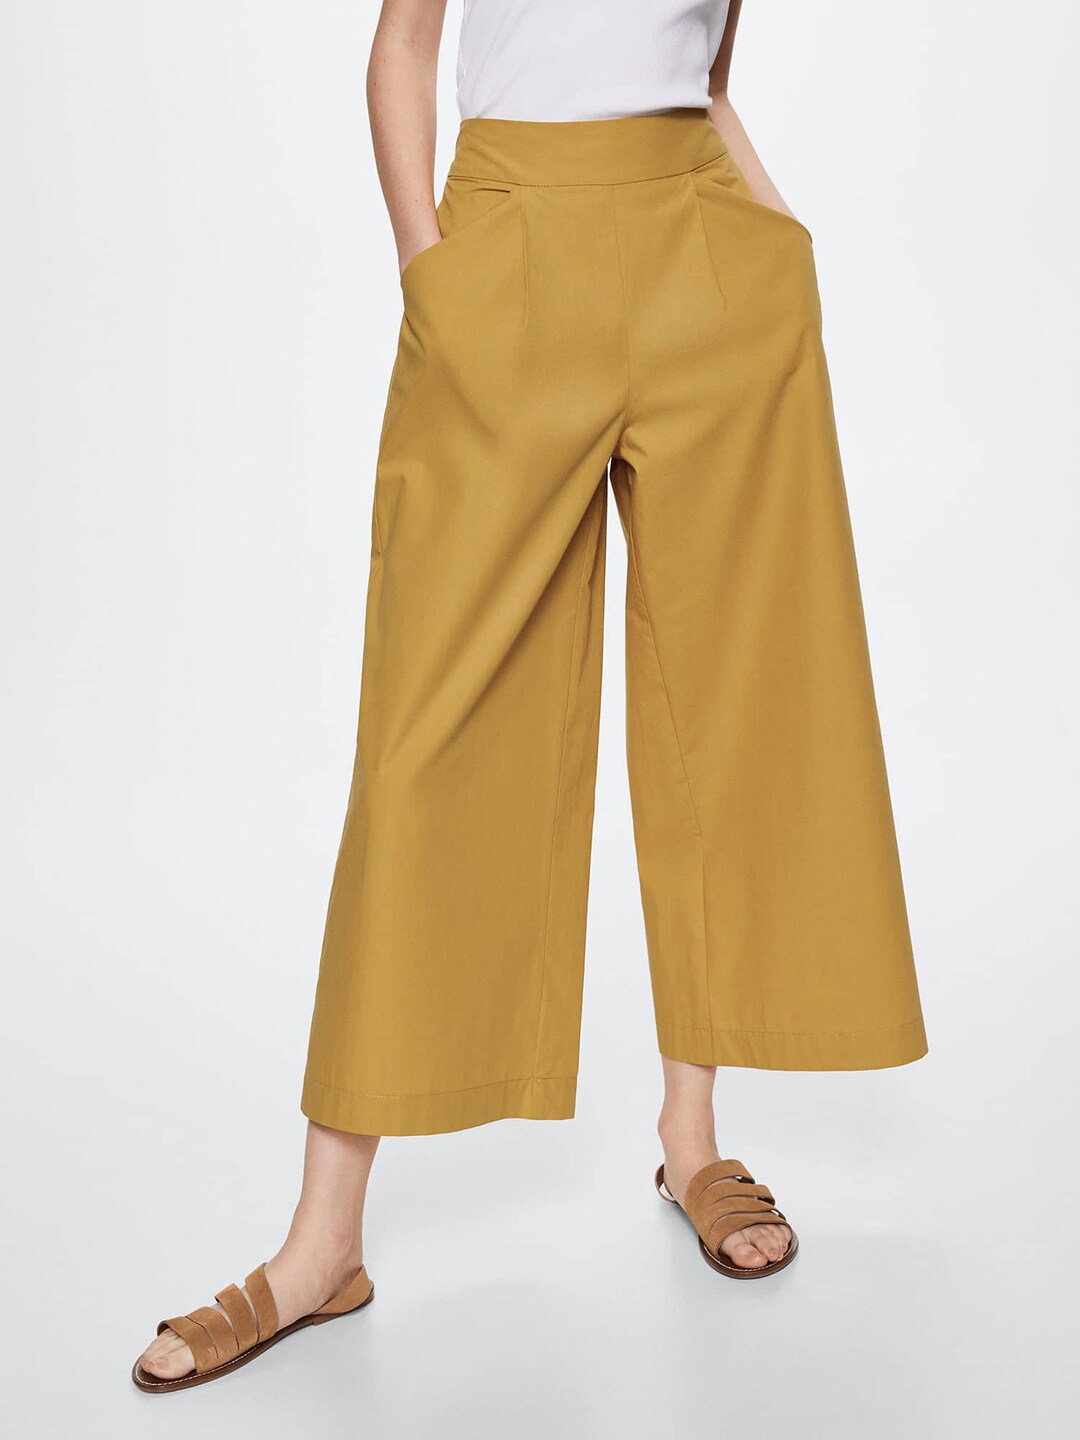 MANGO Women Mustard Yellow Pure Cotton High-Rise Trousers Price in India